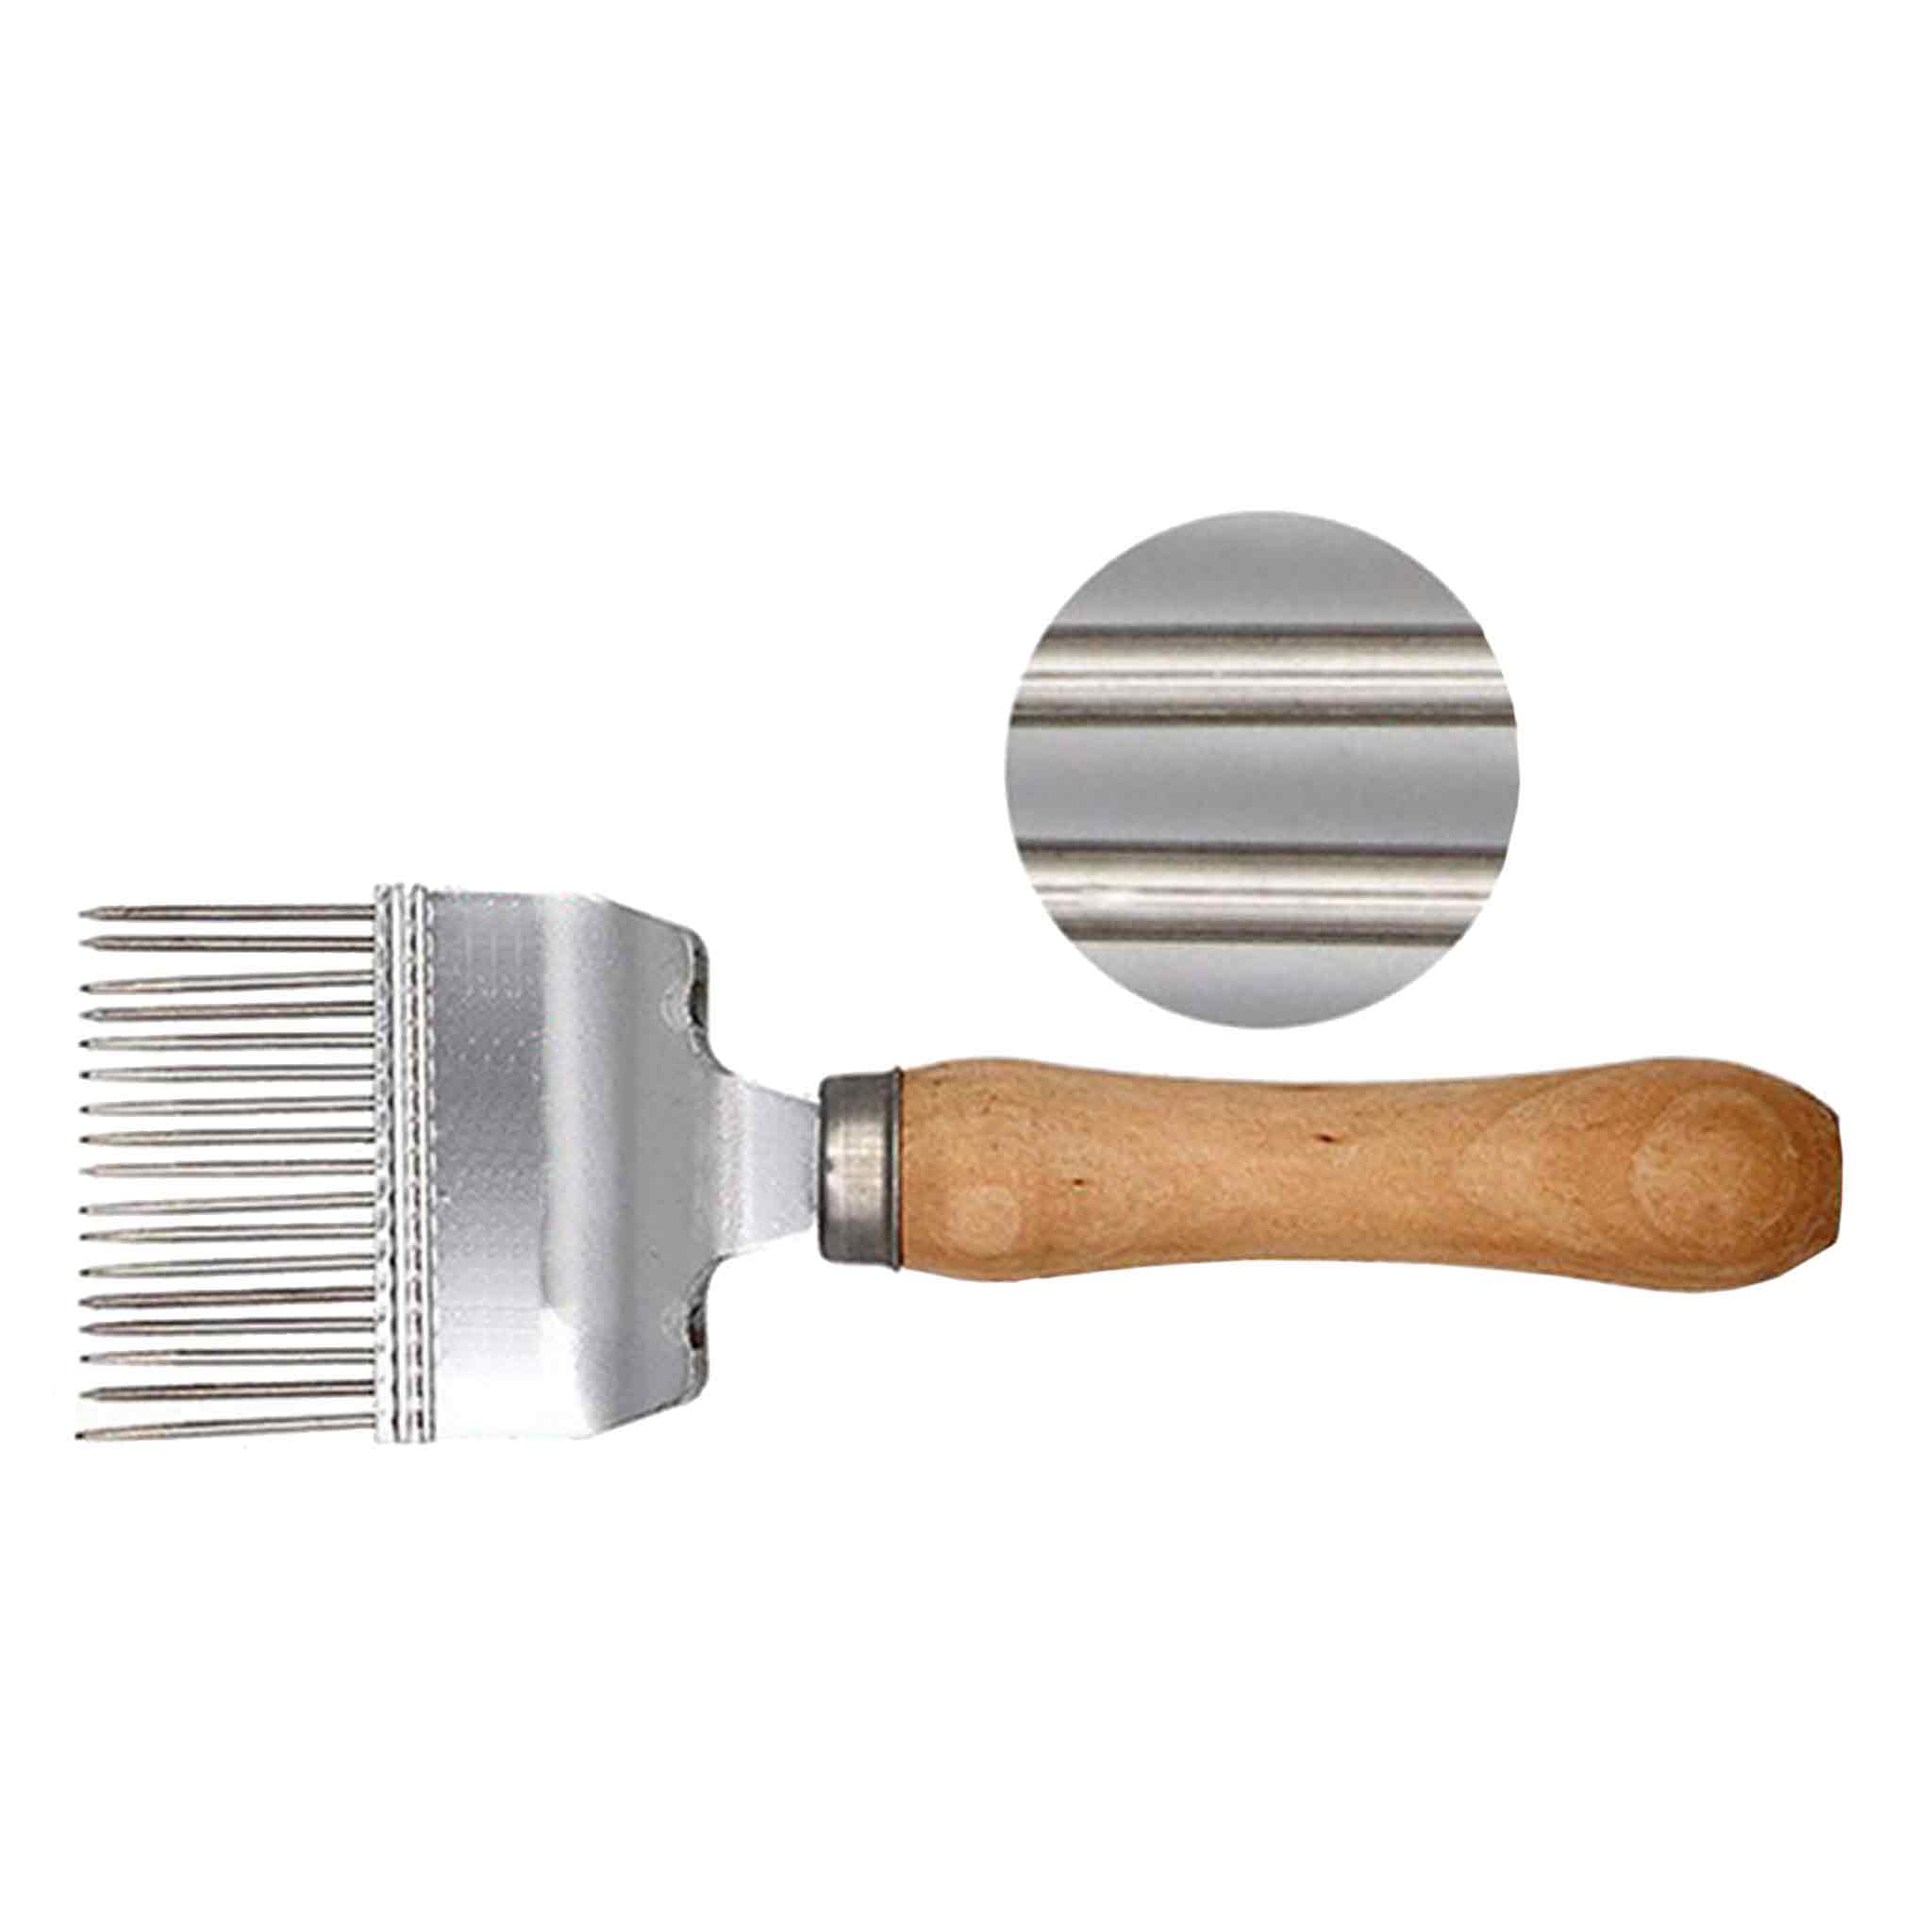 Uncapping Fork with Stainless Steel Needles and Wooden Handle - Processing collection by Buzzbee Beekeeping Supplies